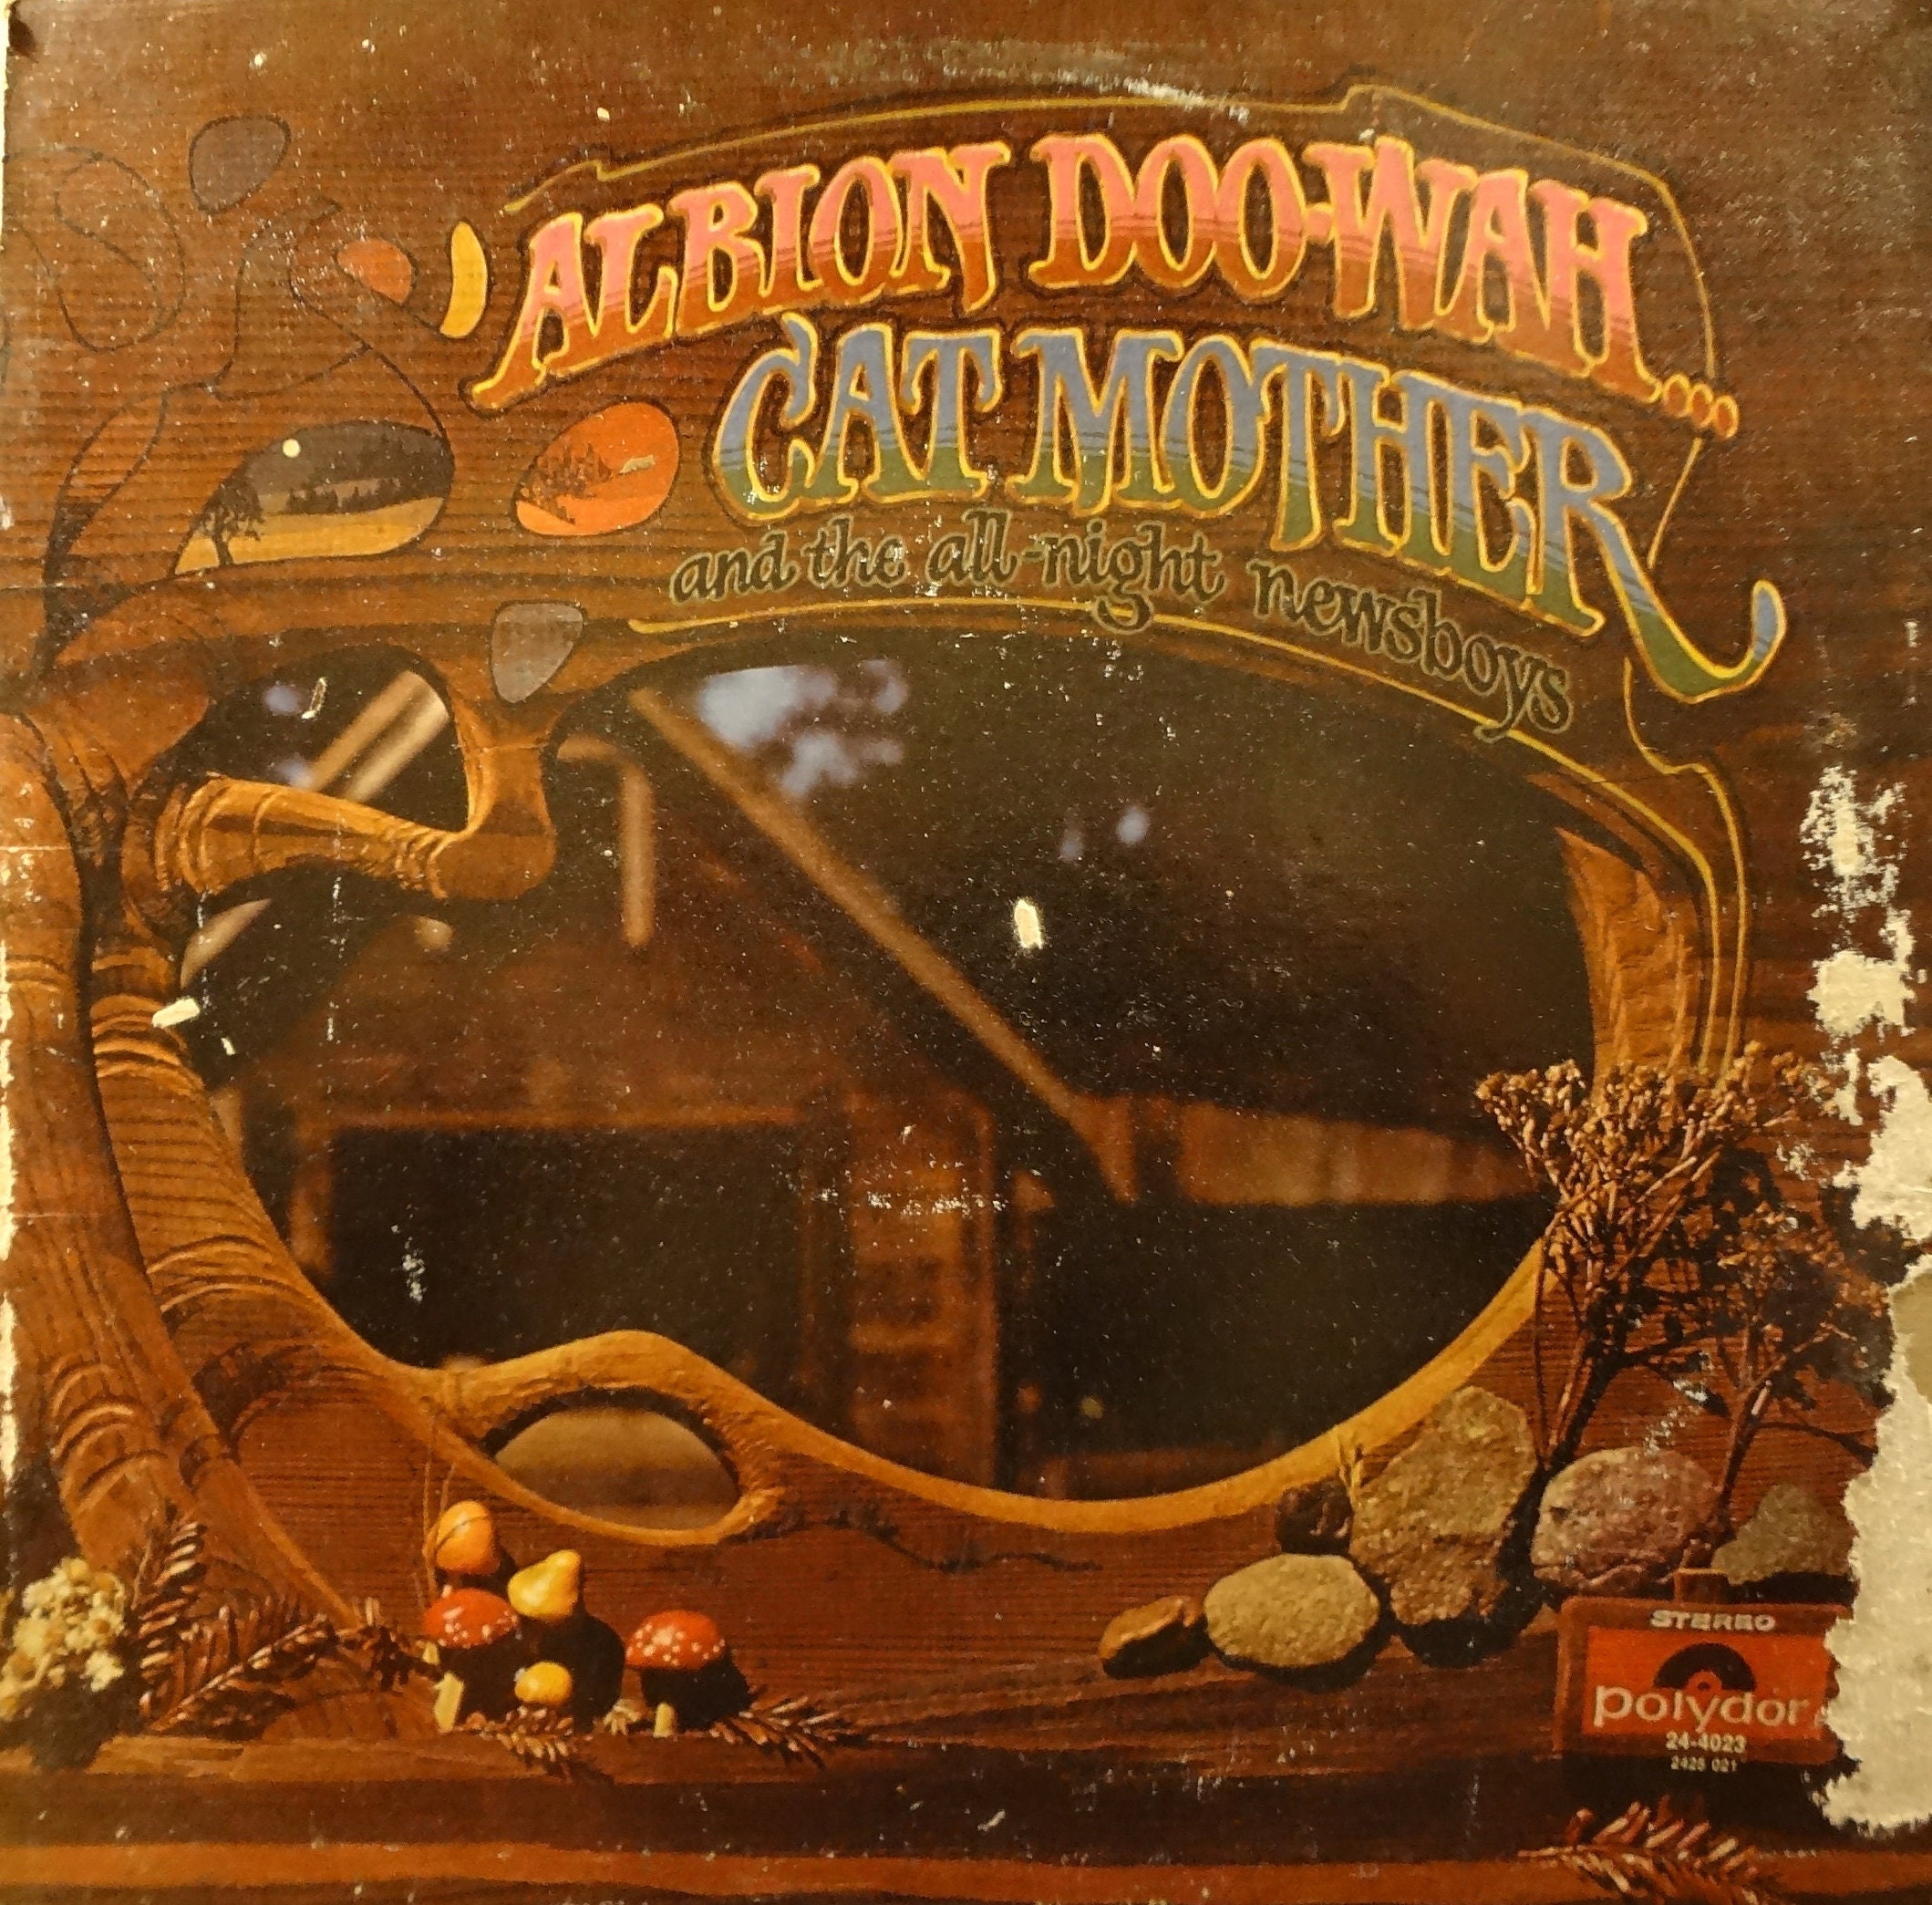 Sump afsked mikroskop Cat Mother and the All-night Newsboys Albion Doo-wah... - Etsy